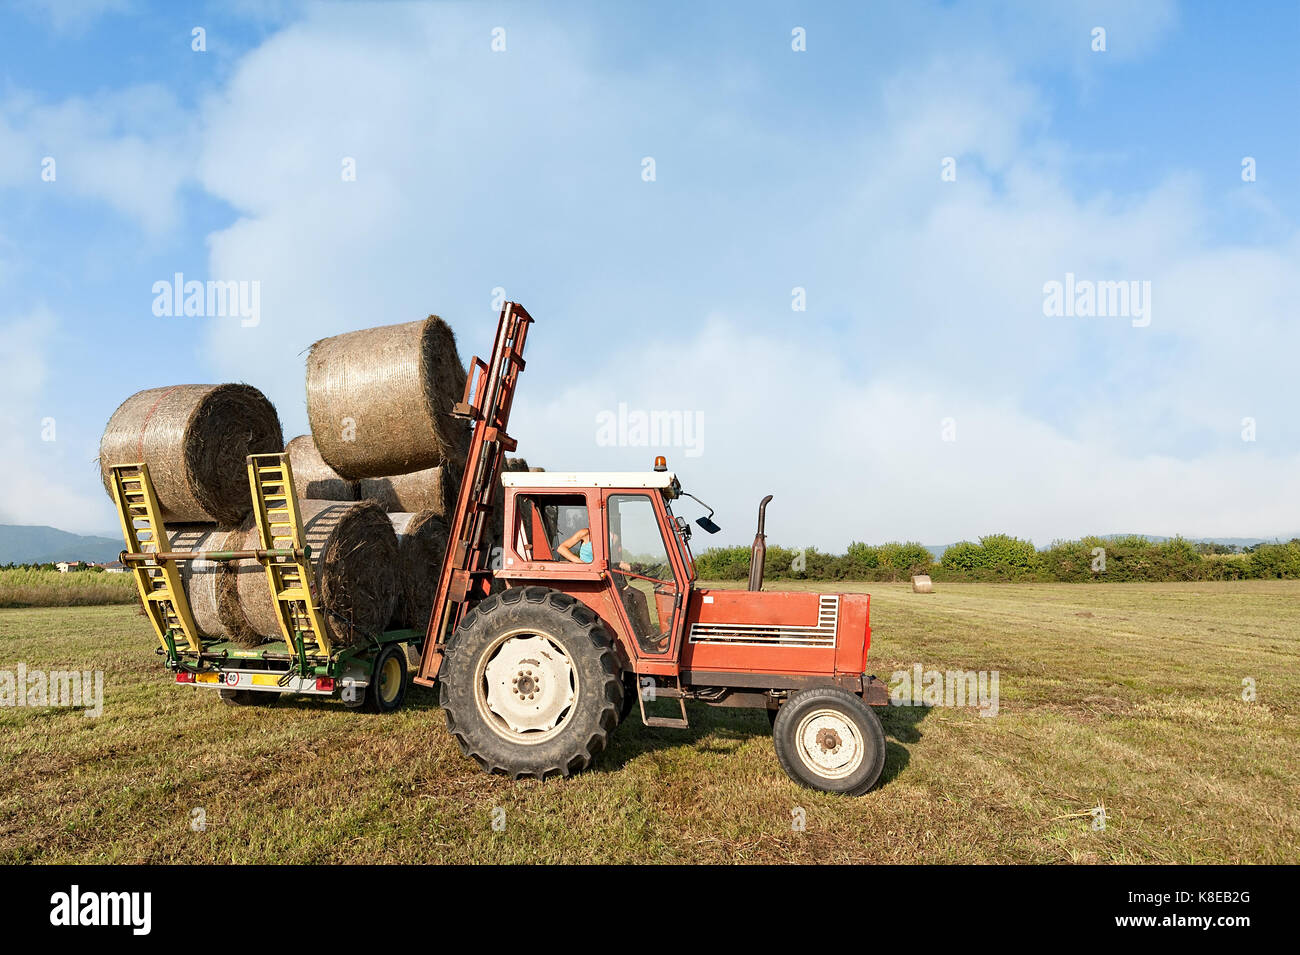 Agricultural scene. Tractor collecting hay bales in field and loading on farm wagon. Stock Photo